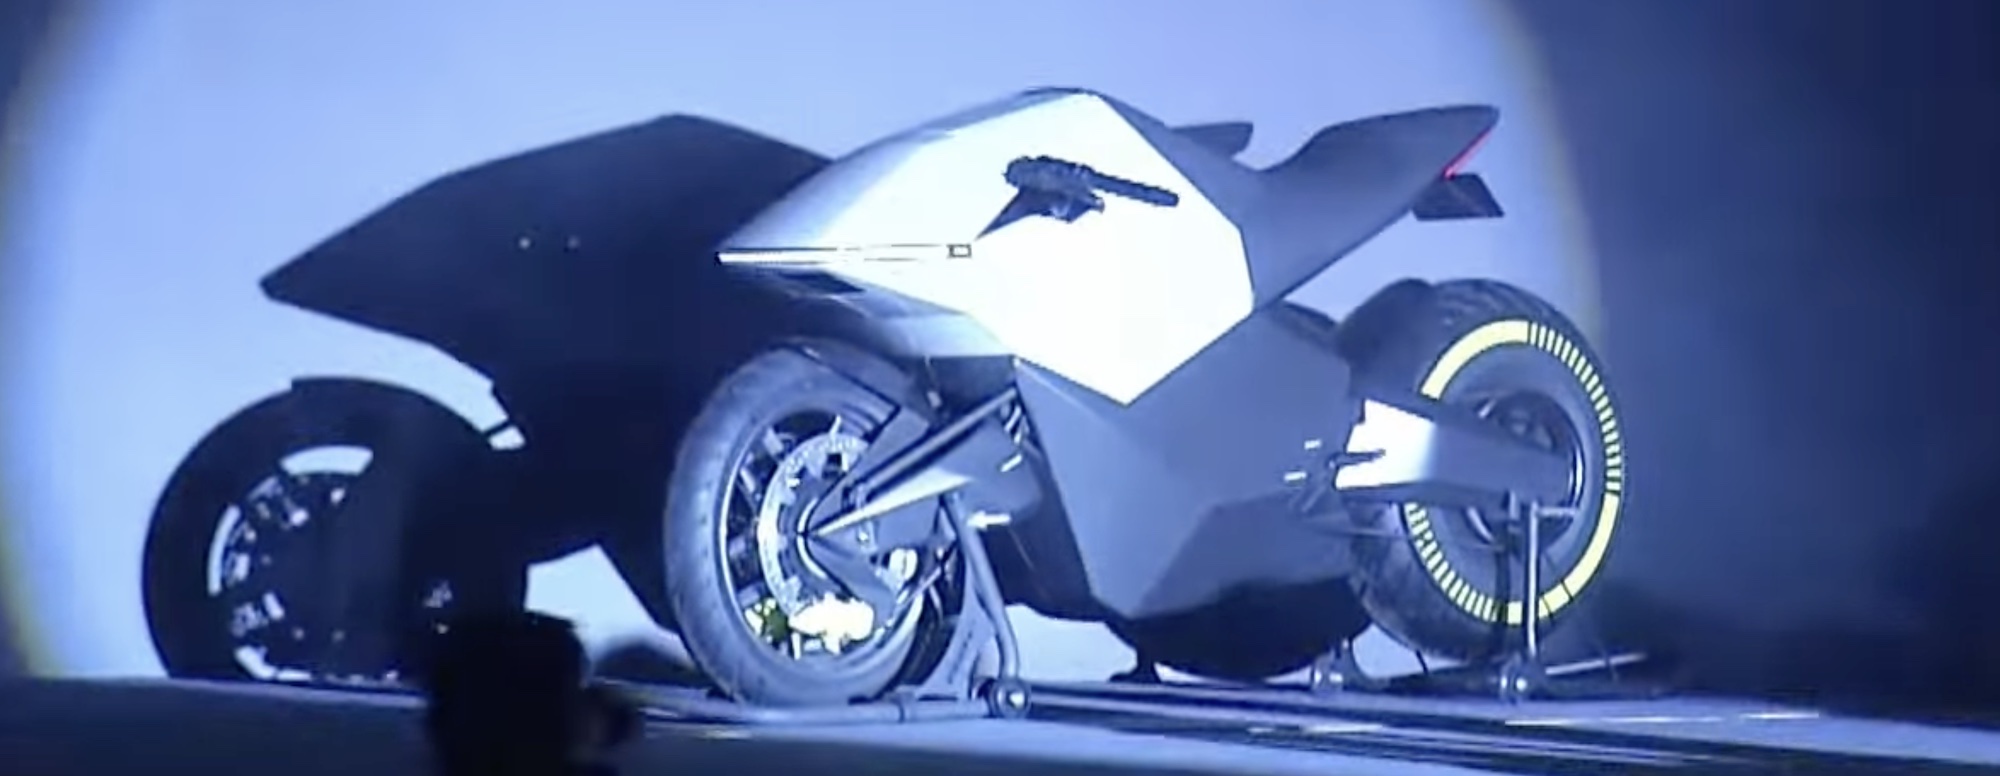 A view of the Ola Diamondhead - a new electric motorcycle currently in the prototype phase. Media sourced from Part 1 of "End ICE Age" on YouTube.